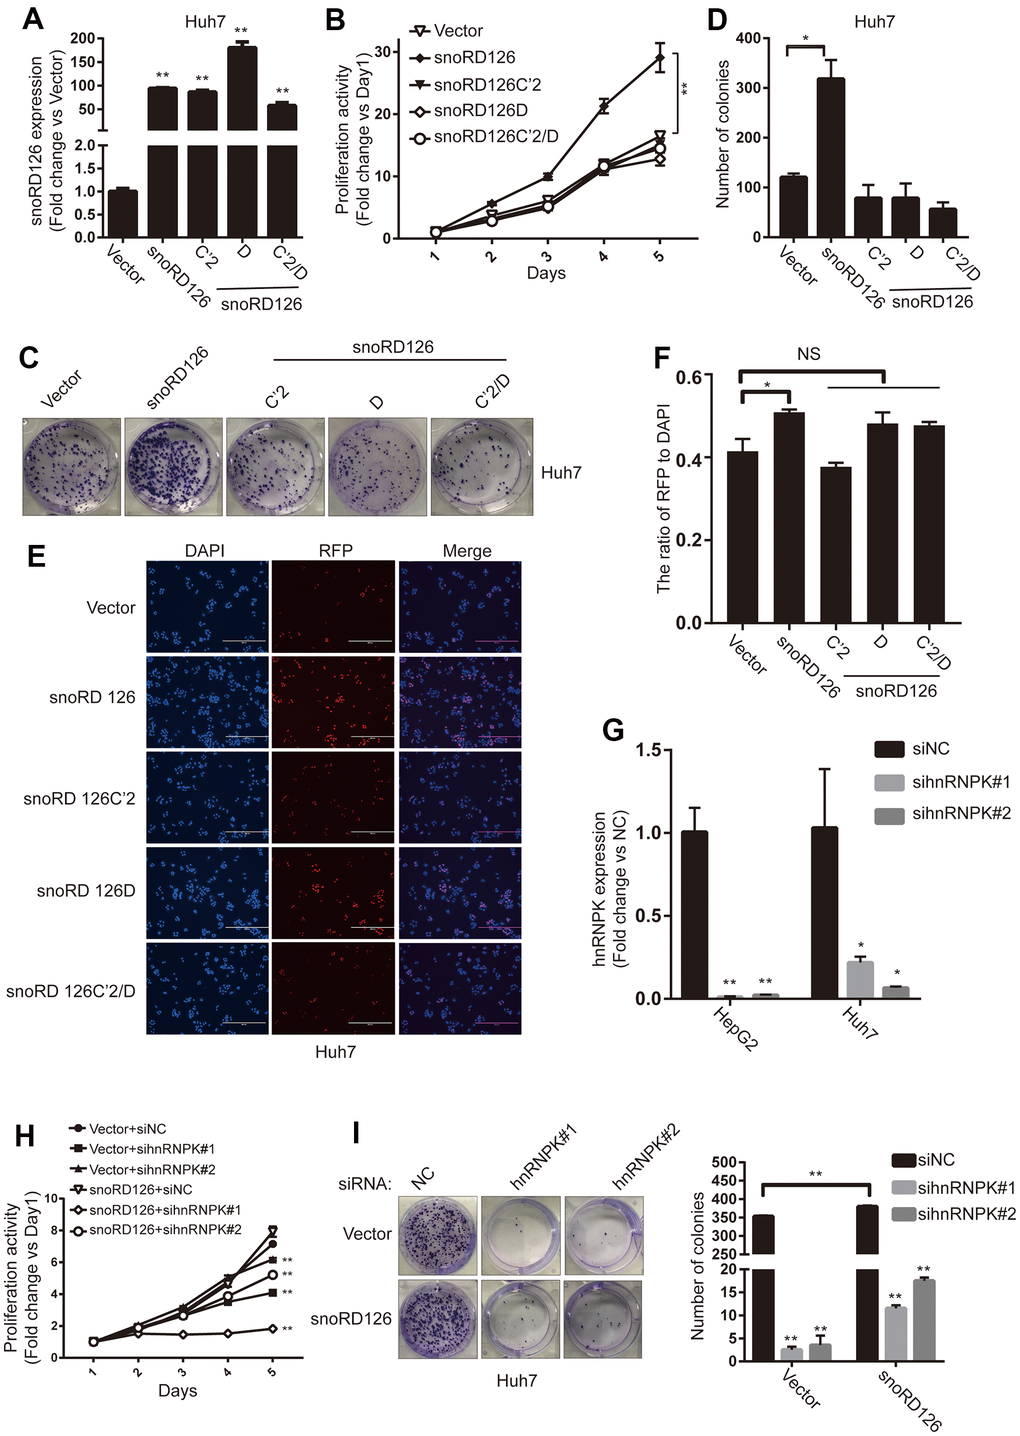 C' box and D box are crucial for snoRD126 to promote cell proliferation. (A) qRT-PCR assay for snoRD126 expression in Huh7 cells with snoRD126 WT or mutants-overexpressing. (B) CCK8 assay performed in Huh7 cells with snoRD126 WT or mutants-overexpression. (C, D) Representative colony formation images and quantification of Huh7 cells with snoRD126 WT or mutants-overexpression. (E, F) Representative EdU images and quantification of Huh7 cells with snoRD126 WT or mutants-overexpression. Scale bar, 400um. (G) qRT-PCR assay for hnRNPK expression in HepG2 cells and snoRD126-overexpressing Huh7 cells with hnRNPK siRNA treatment. (H) CCK8 assays performed in snoRD126- or vector-overexpressed Huh7 cells with hnRNPK siRNA treatment. (I) Representative colony formation images and quantification of snoRD126- or vector-overexpressed Huh7 cells with hnRNPK siRNA treatment. The data represent mean ± SD (n = 3). *P 